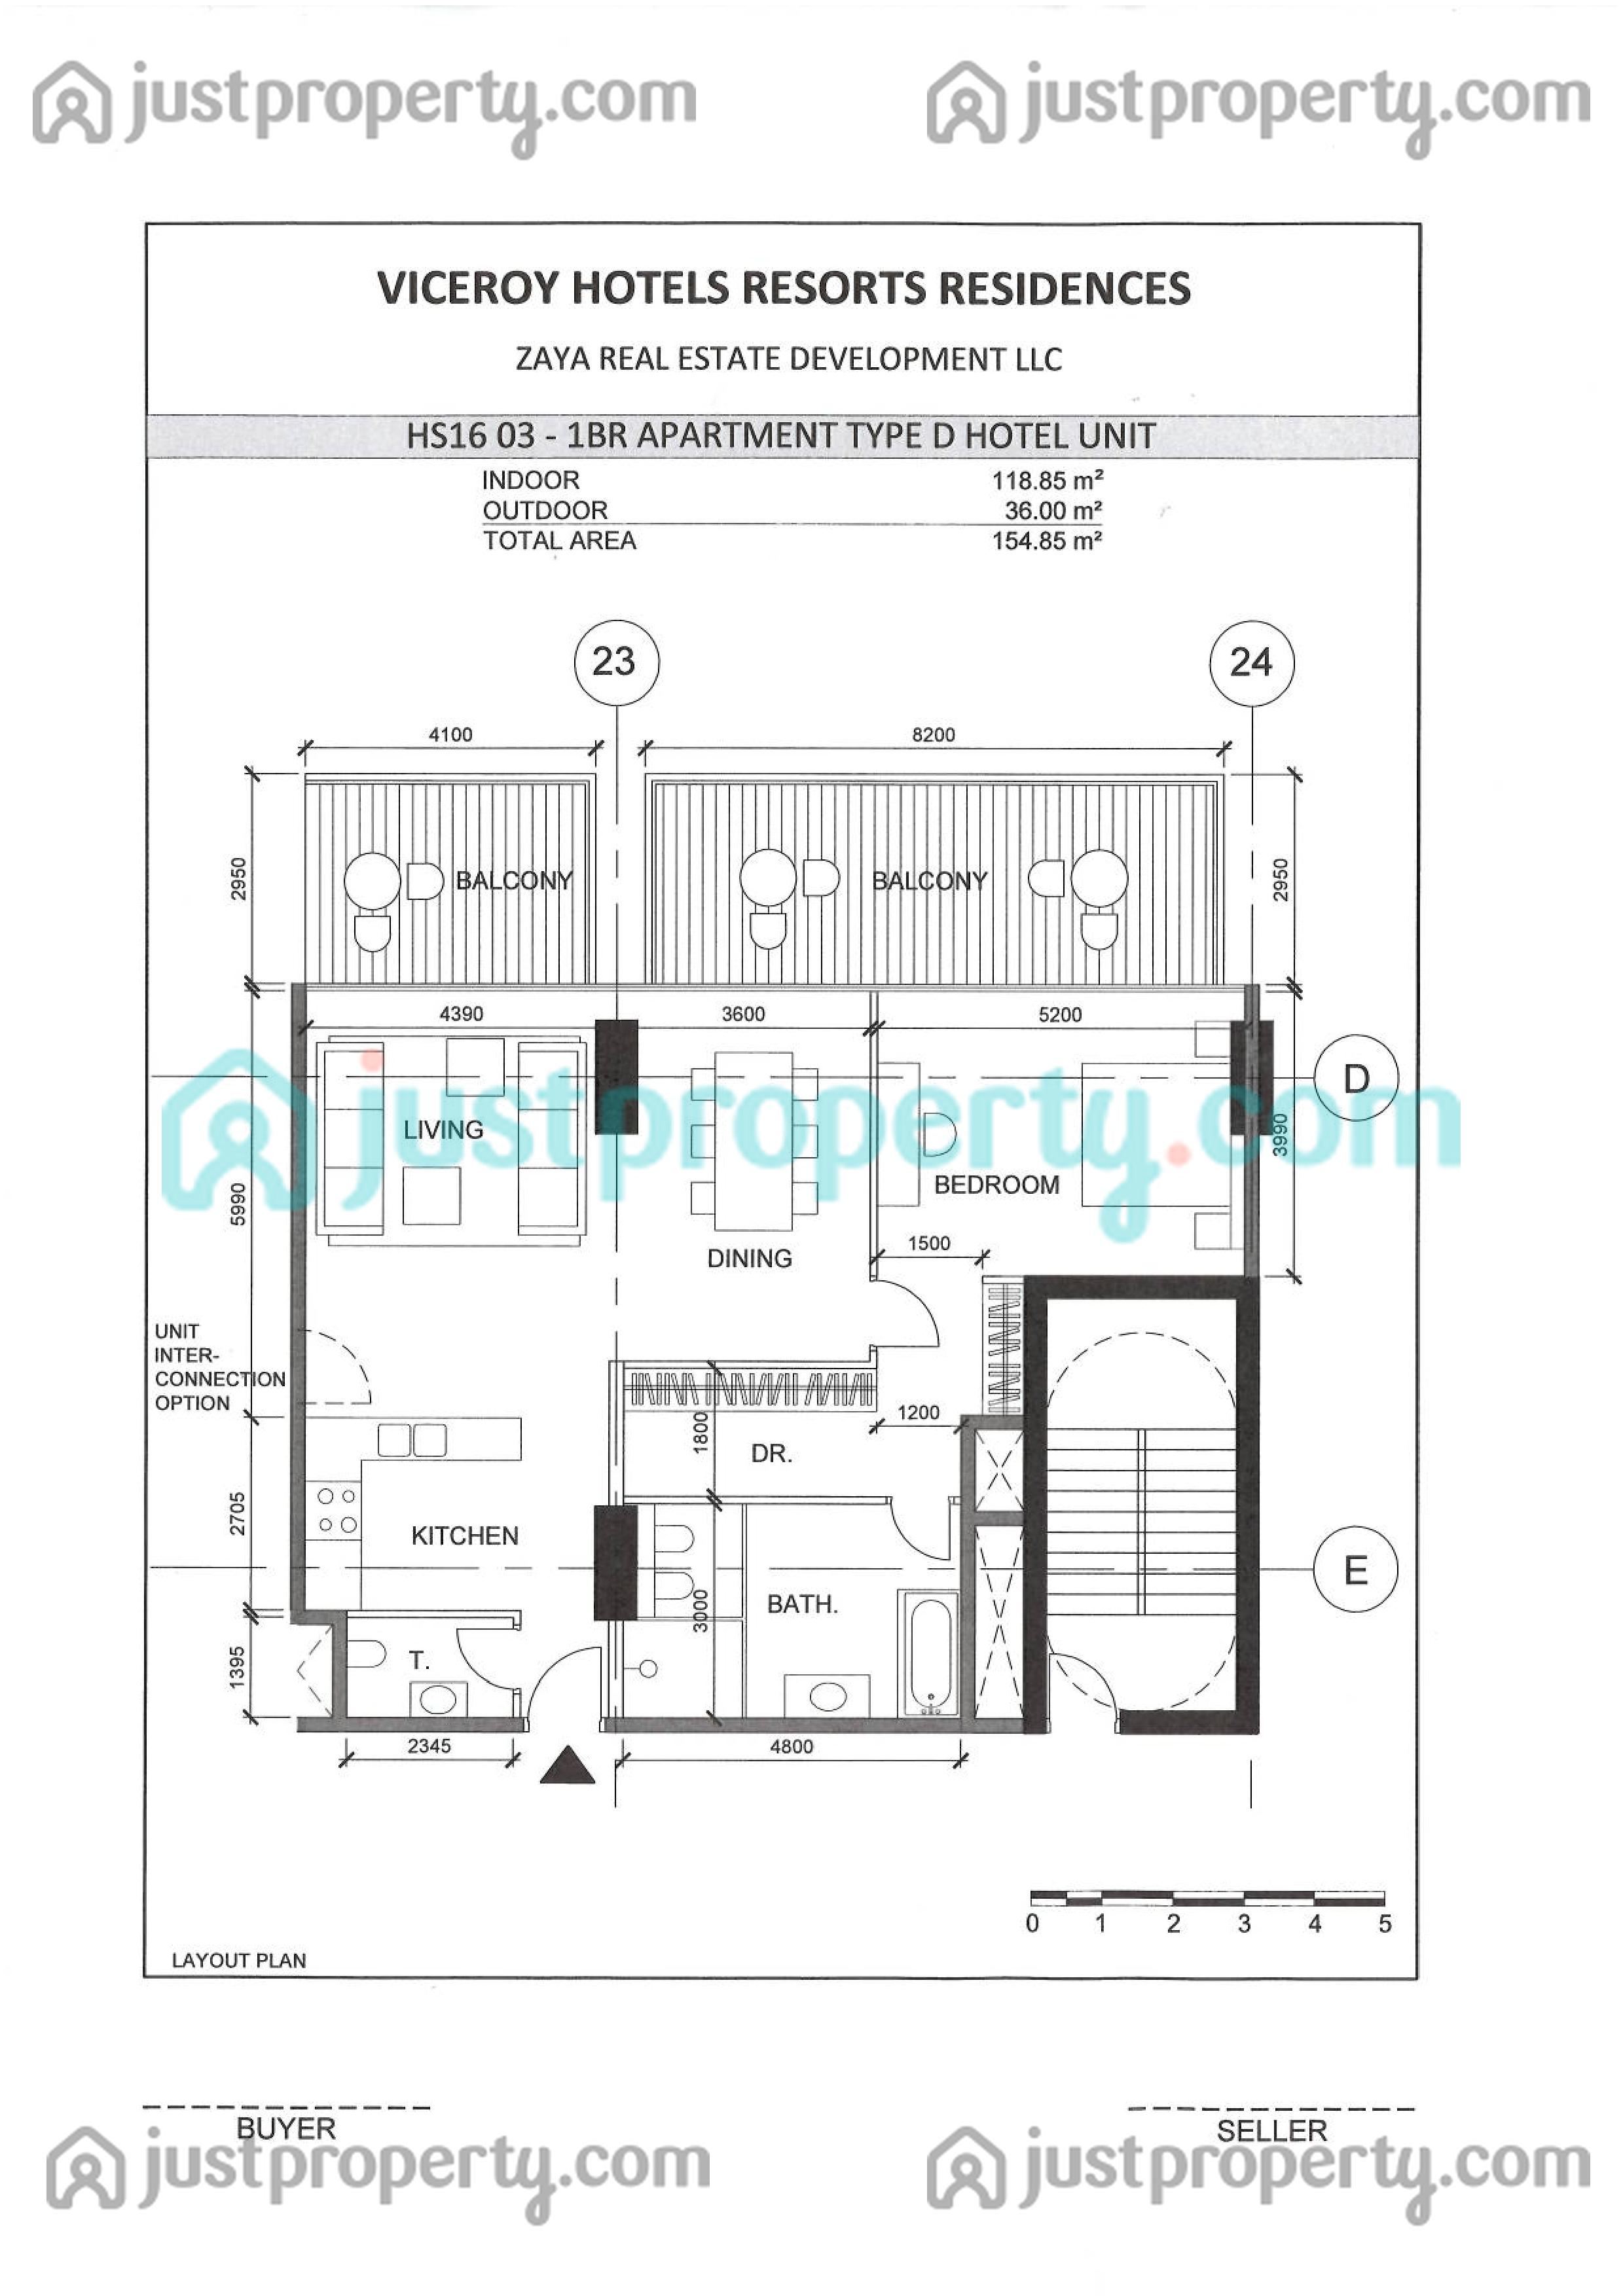 Viceroy Signature Residences Floor Plans